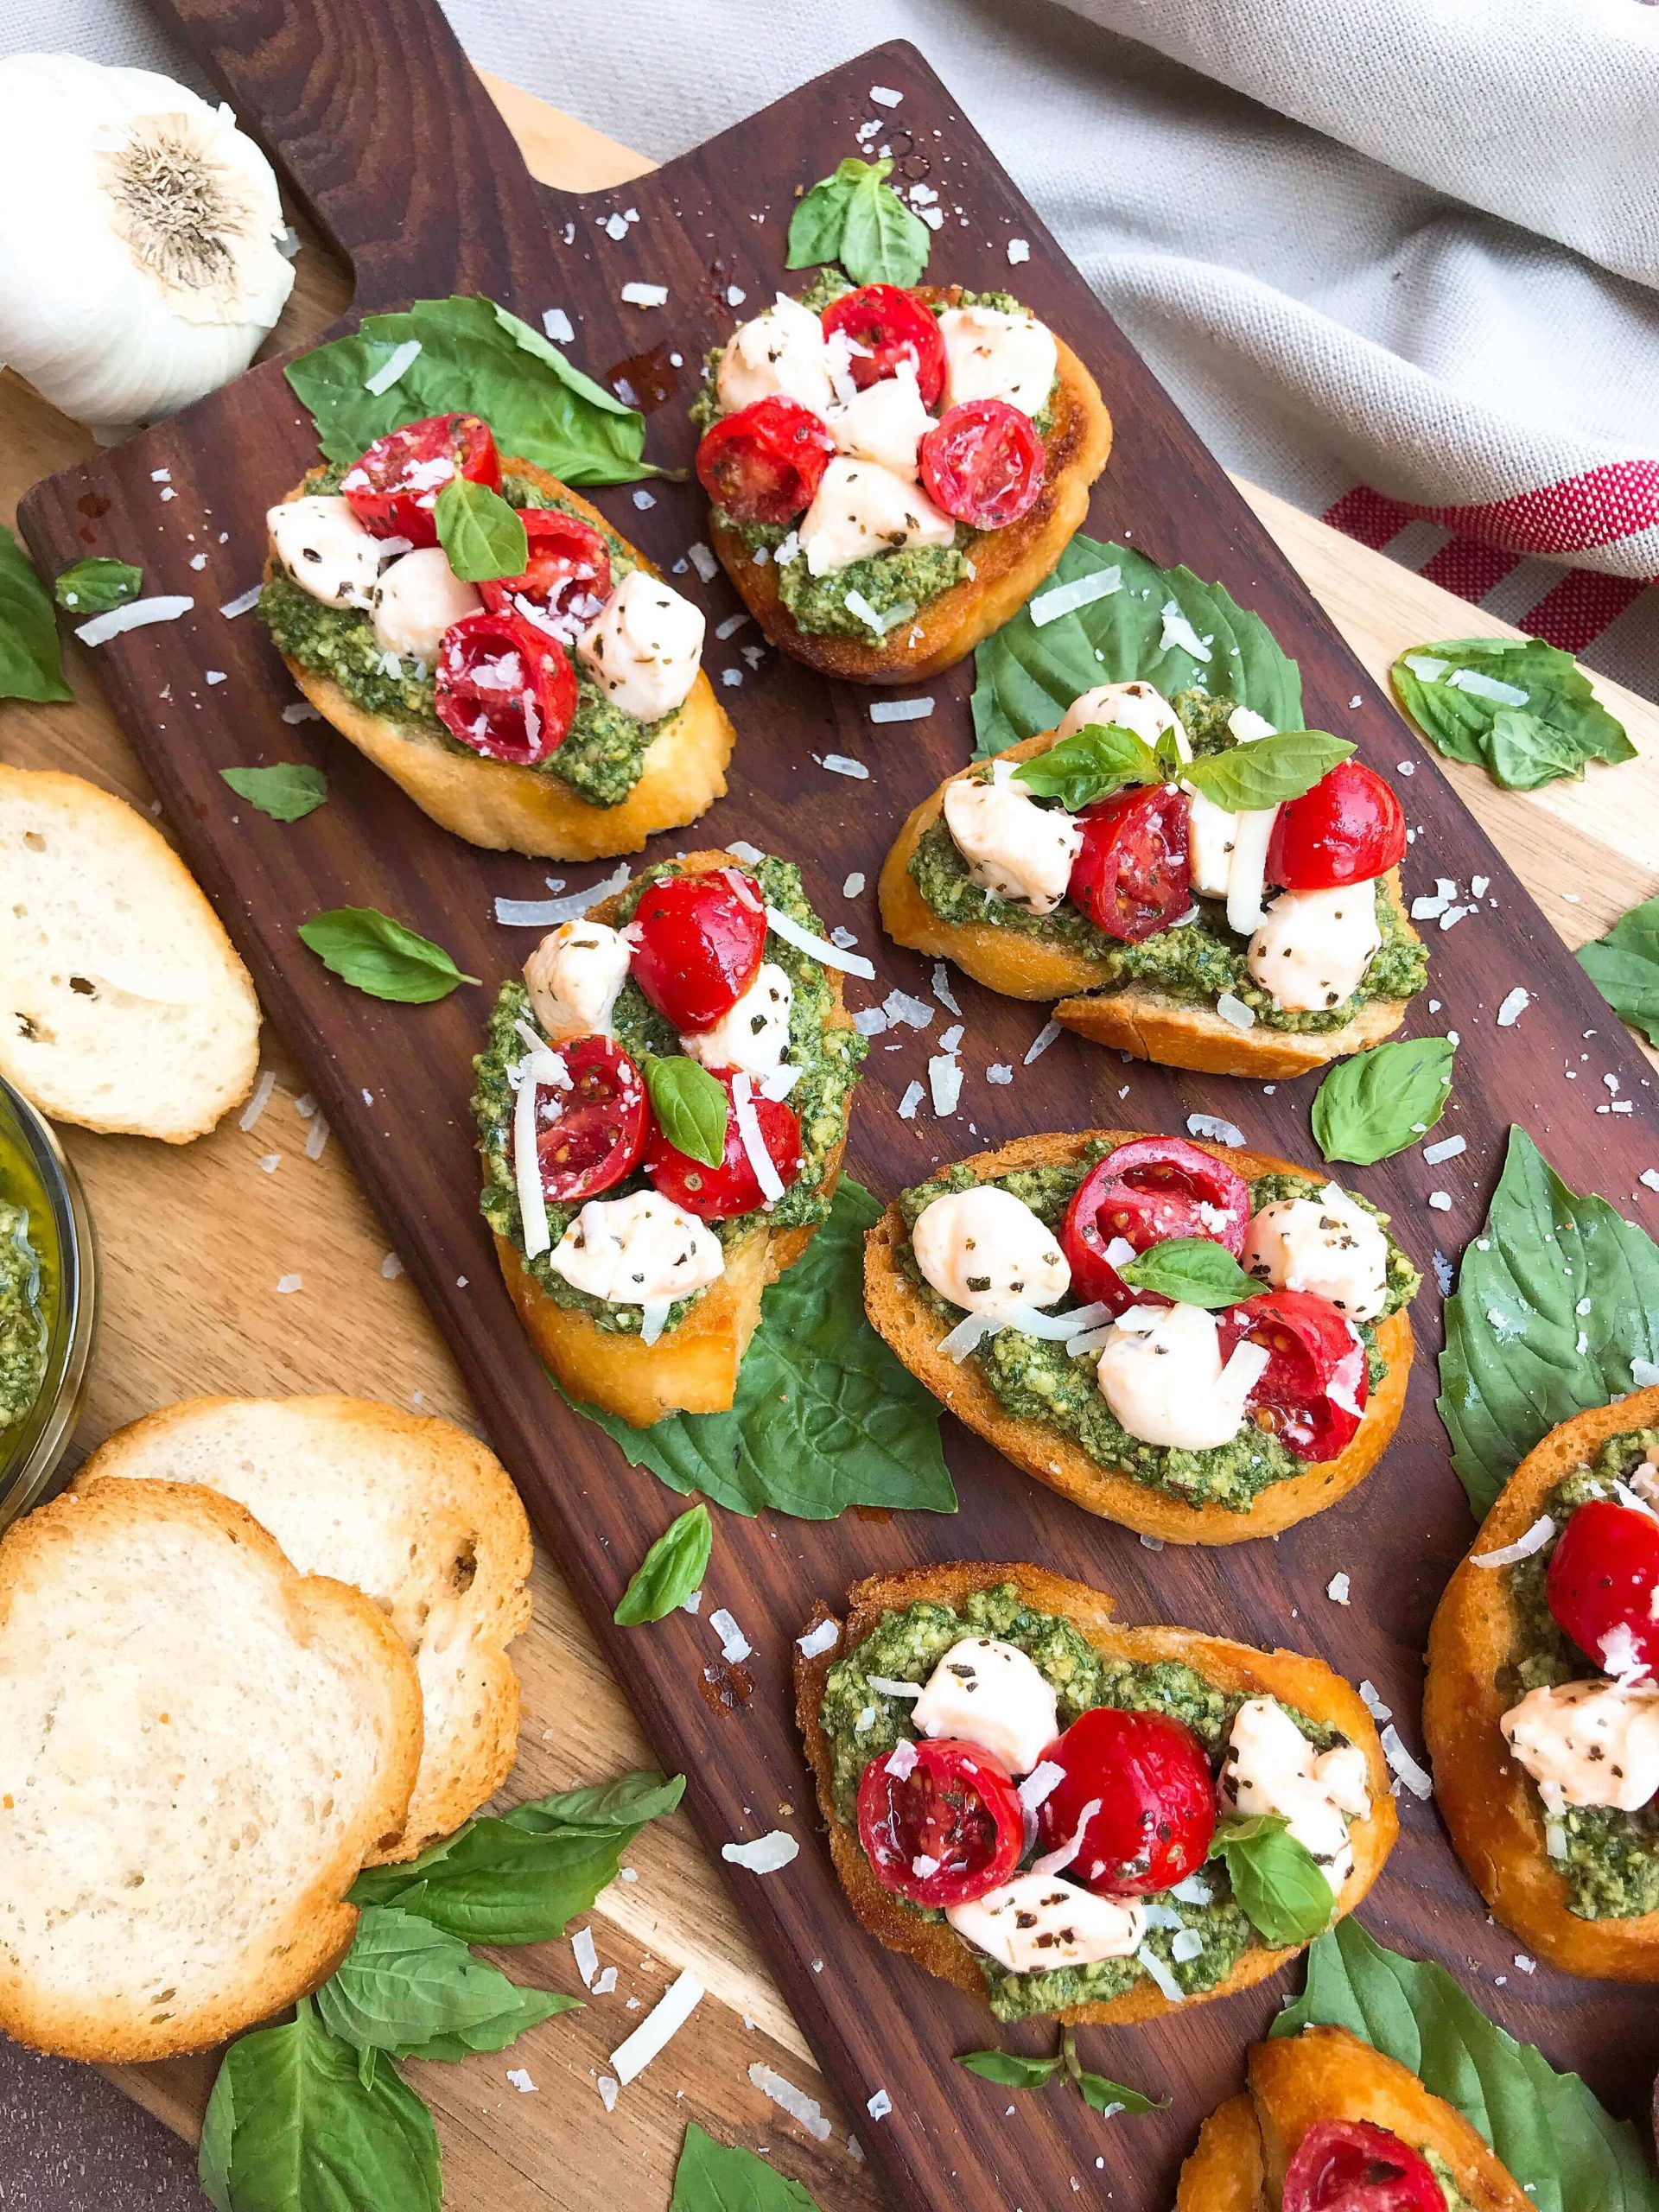 Bright colored bruschetta is topped with white cheese, red cherry tomatoes and green pesto.